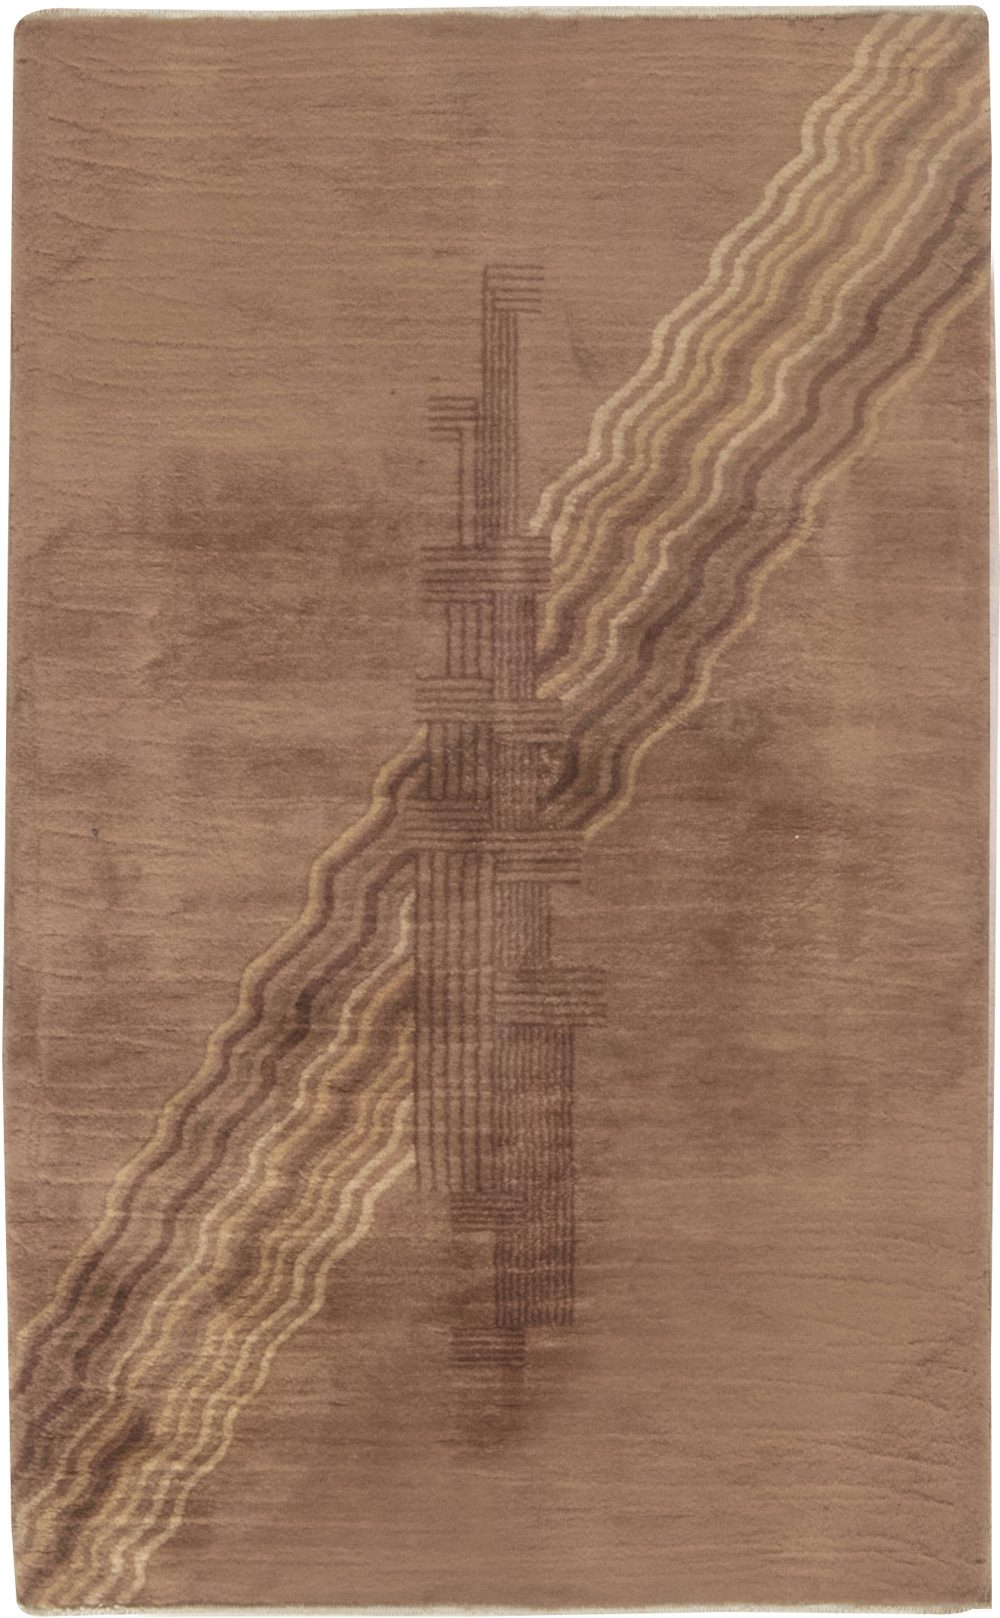 Mid-20th century Chinese Art Deco Handmade Wool Rug in Brown Shades BB6634